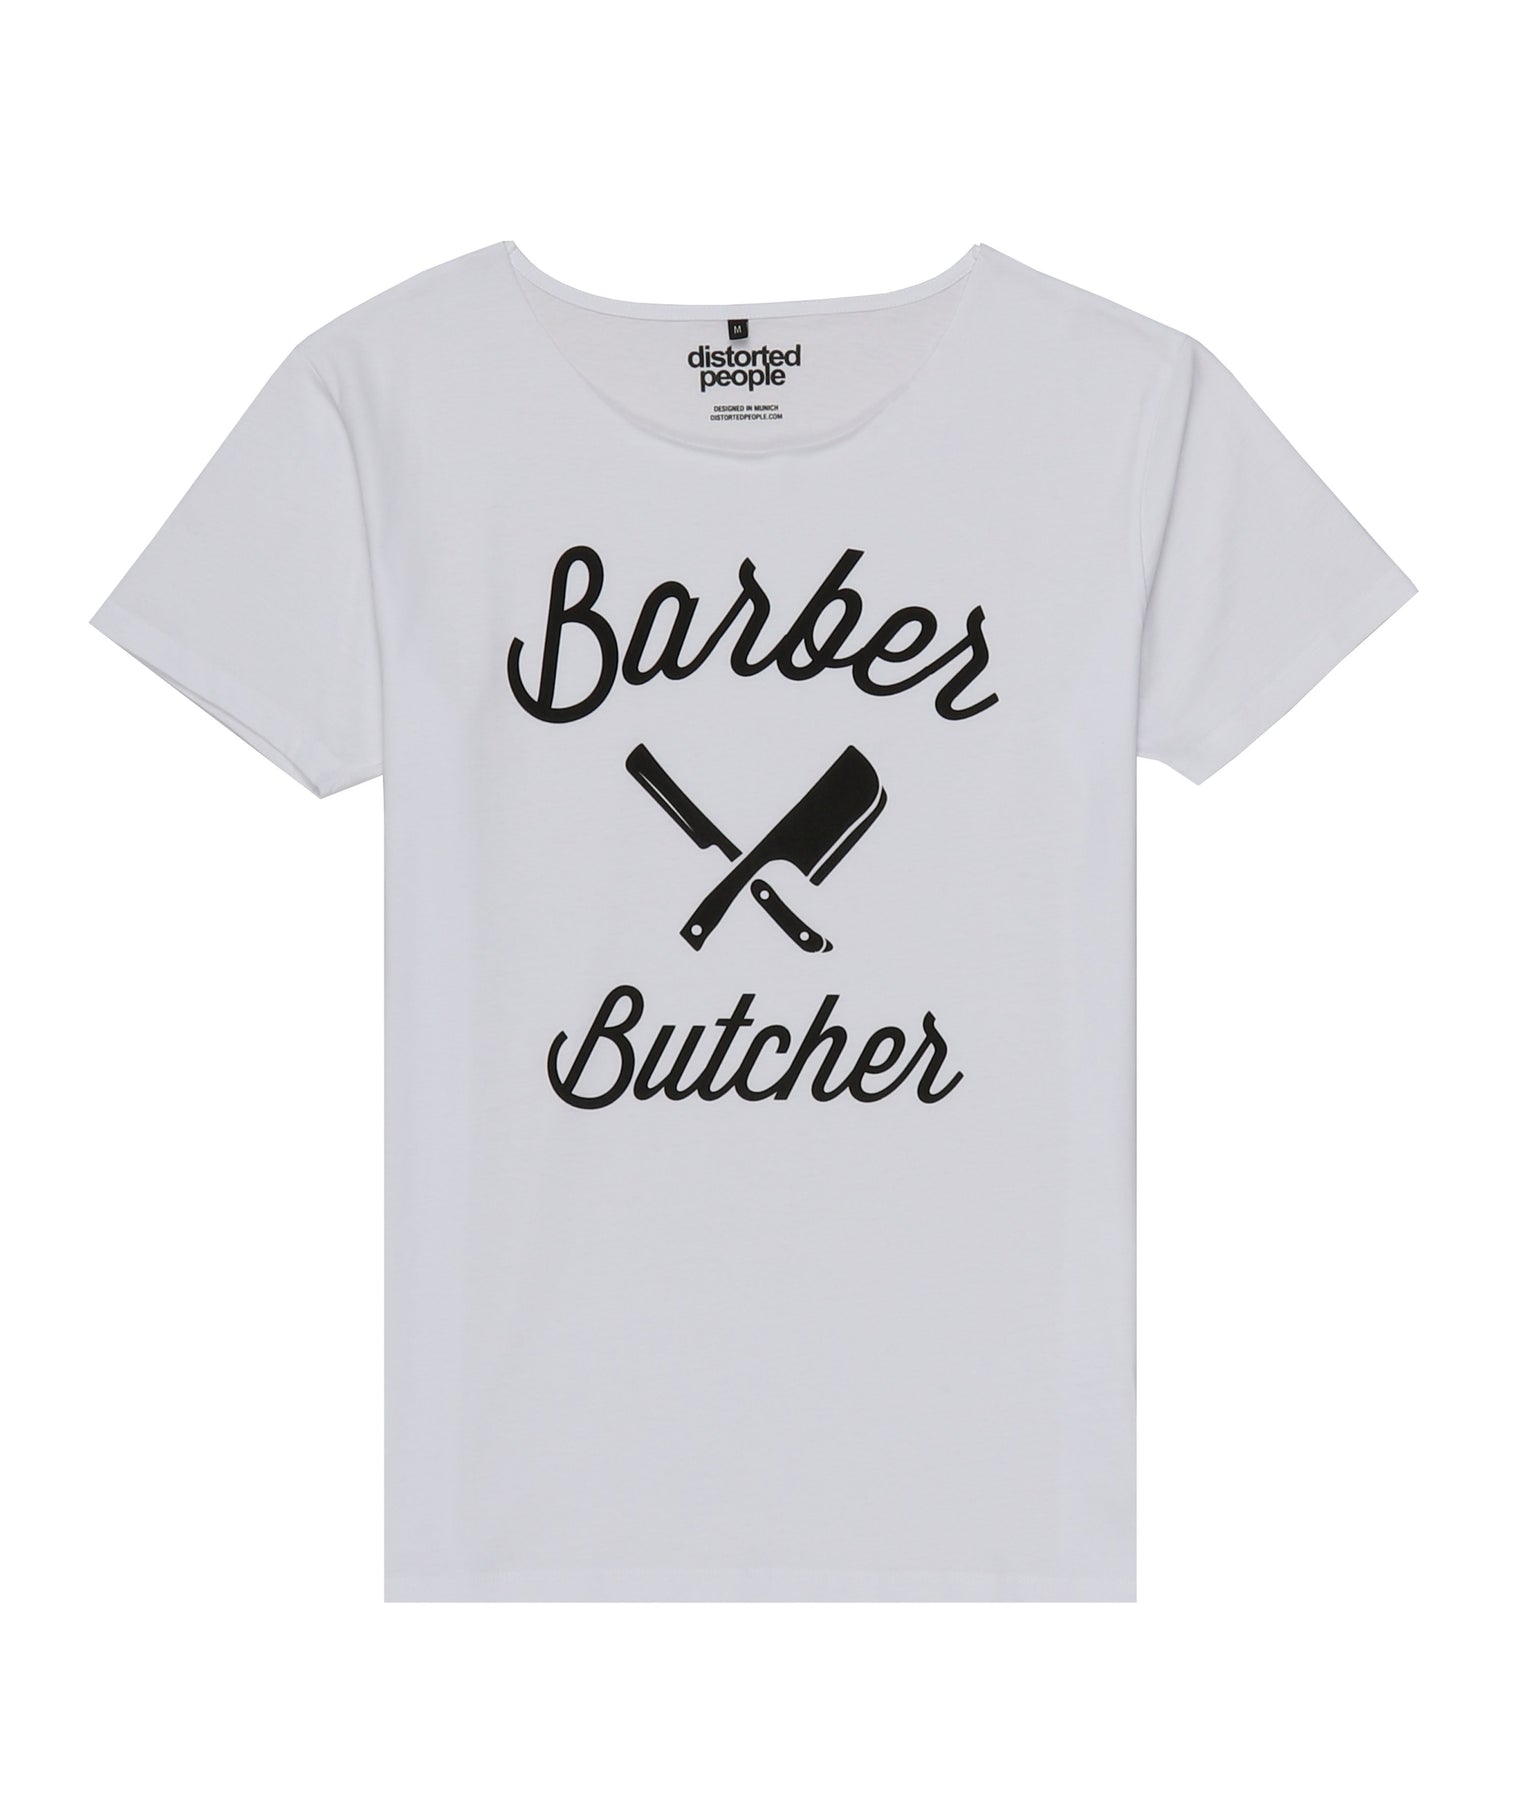 & People T-Shirt – Distorted Distorted Black | Butcher Cut Neck People USA Blades Barber